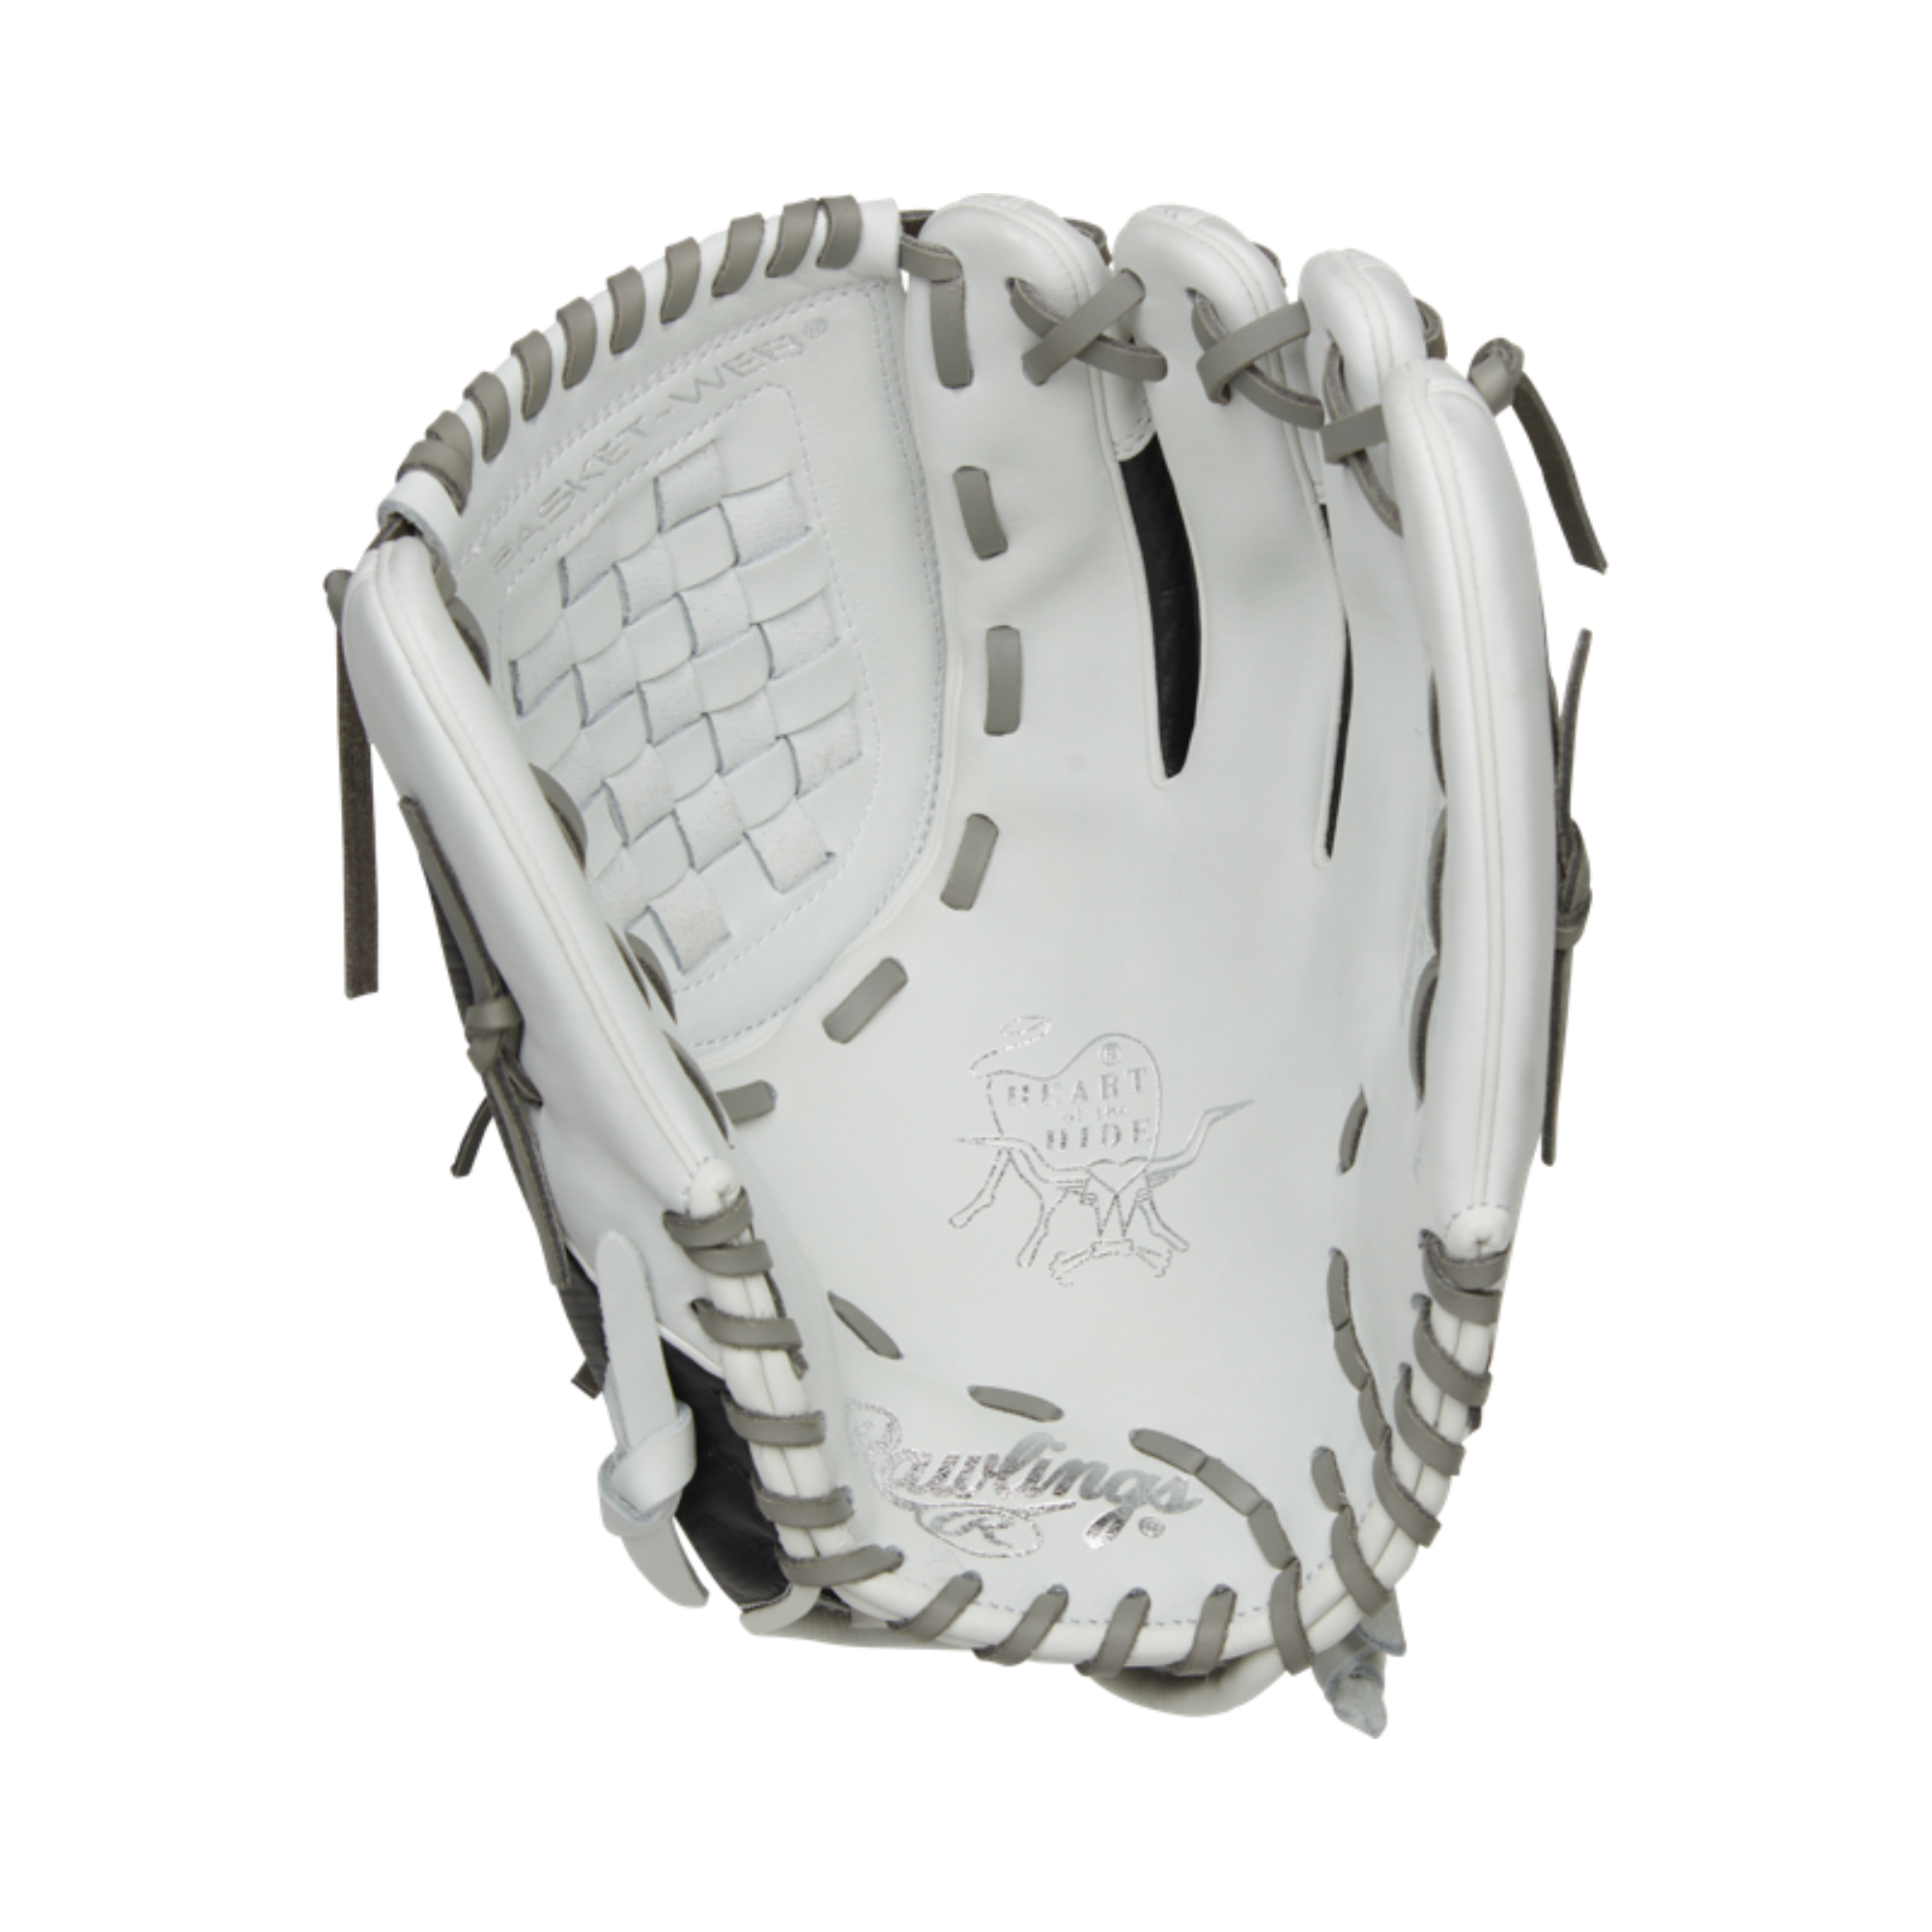 Rawlings Heart of the Hide Fastpitch Glove P/INF/OF Basket RHT 12.5"